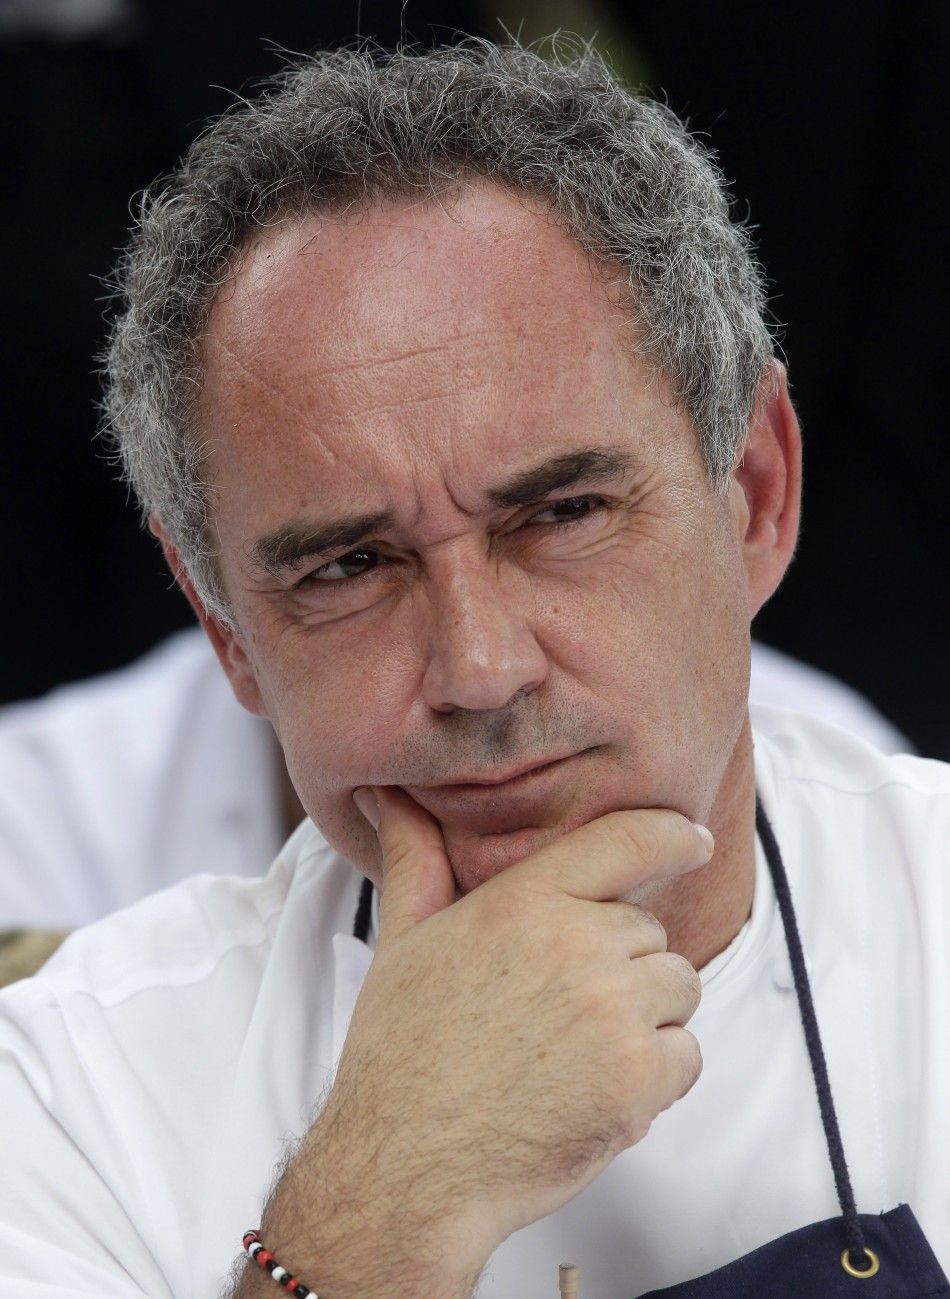 Ferran Adria, chef and co-owner of El Bulli restaurant, gestures during a news conference outside the restaurant in Cala Montjoi, near Roses